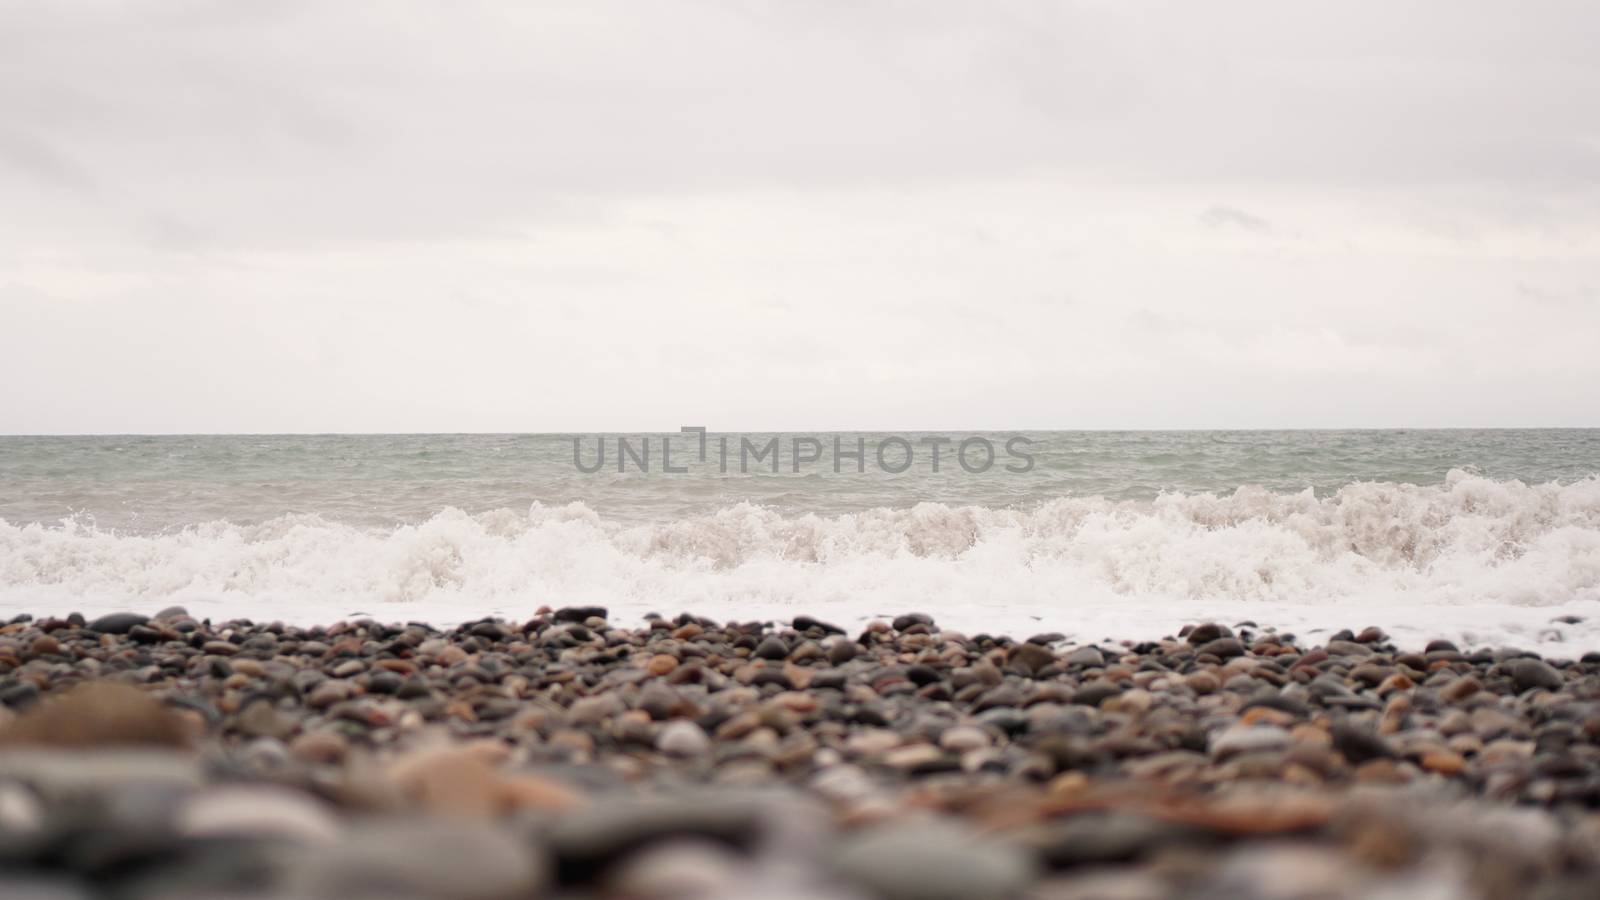 Pebble stones on the shore close up in the blurry light in the distance by natali_brill